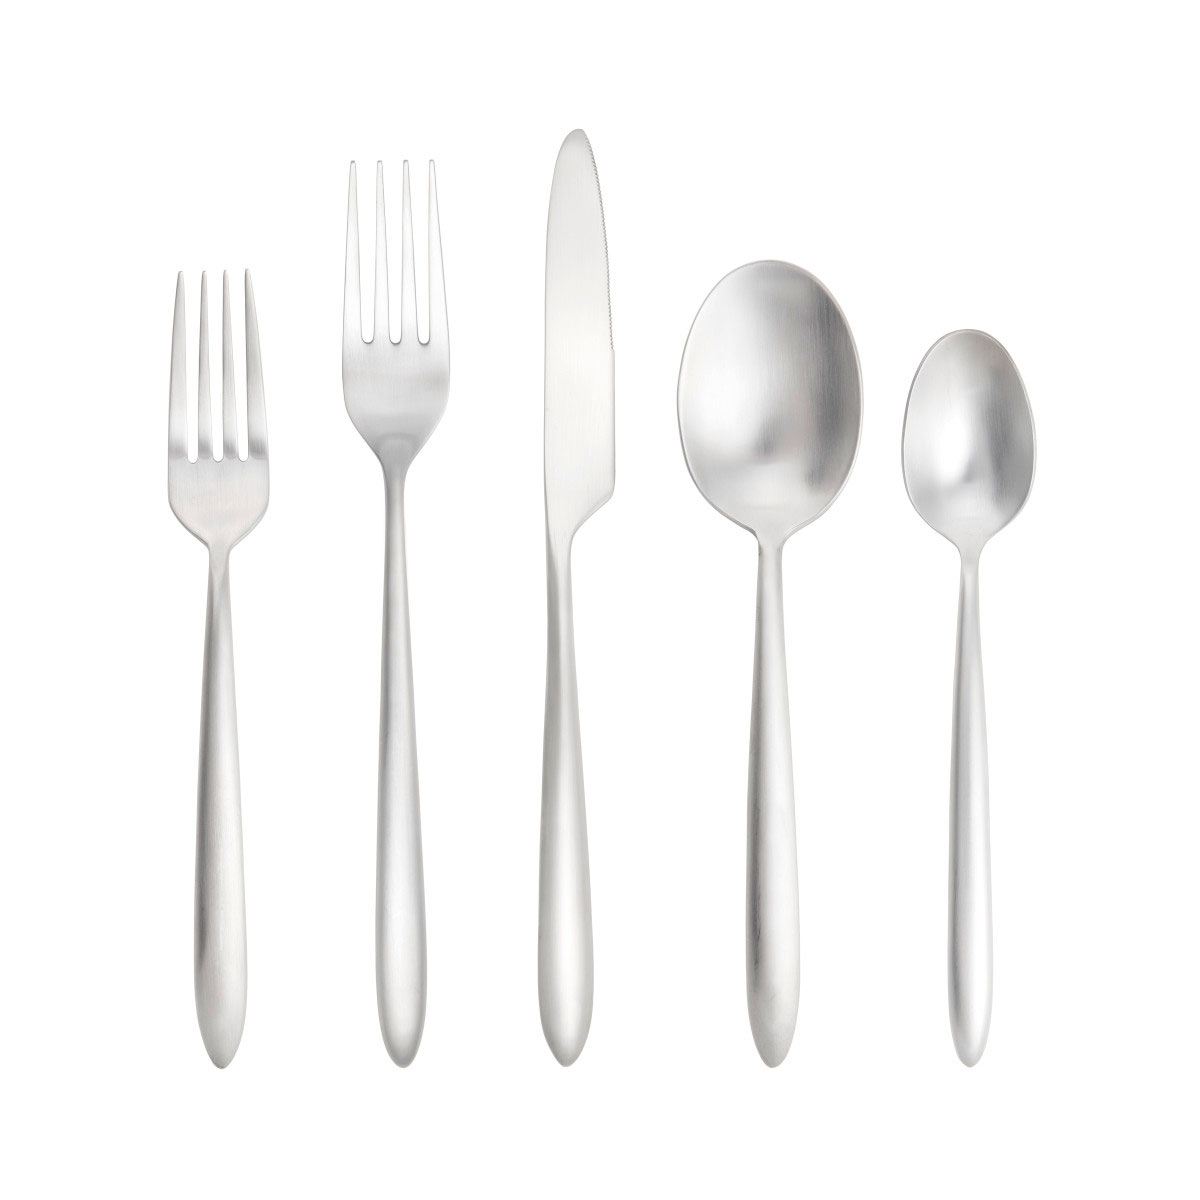 Fortessa Stainless Flatware Velo Brushed 5 Piece Place Setting